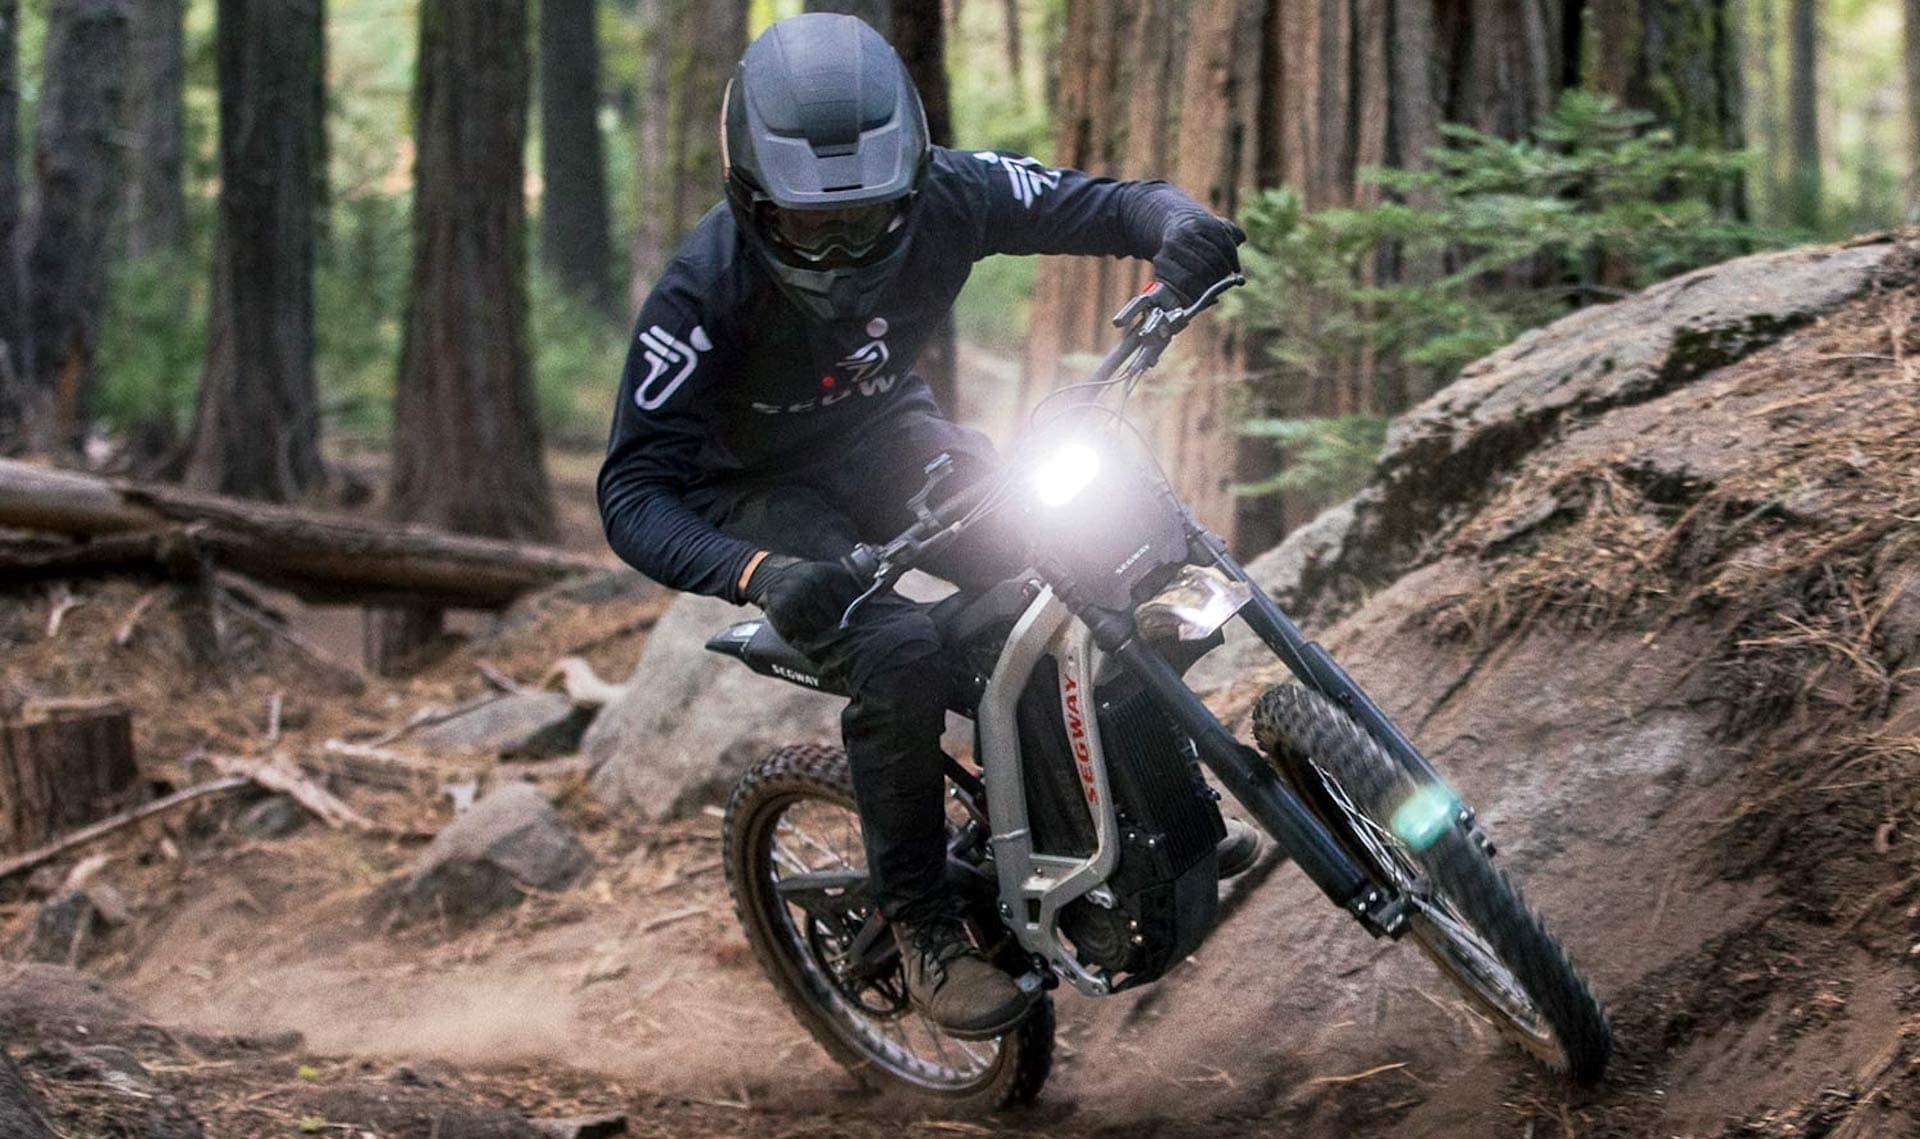 Segway X260 Dirt eBike: 75-Mile Range, 0-31 in 4 Seconds, $5,000 Price Tag